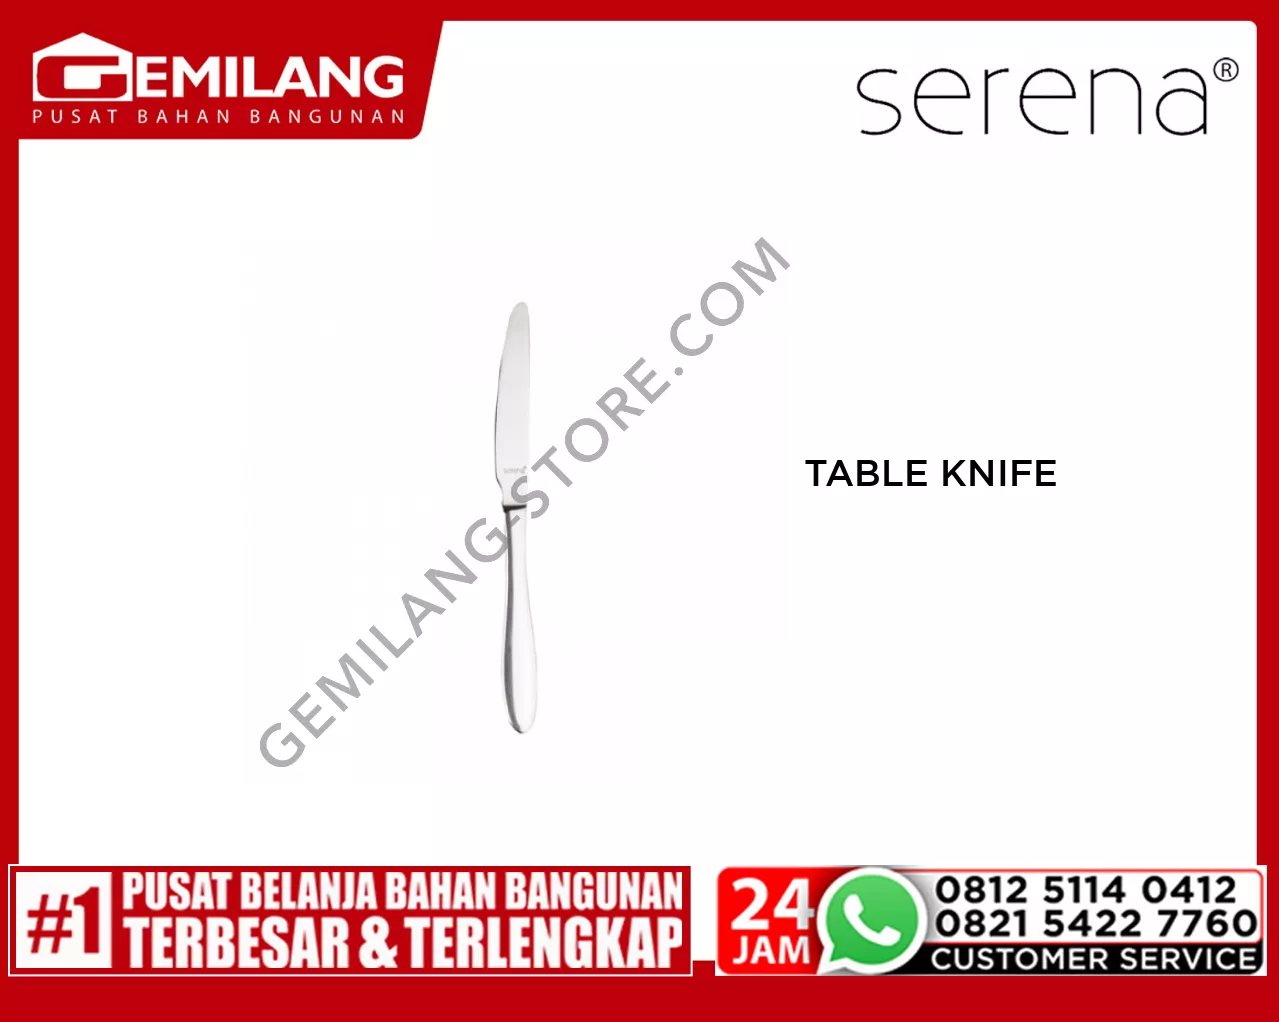 SERENA VANCOUVER TABLE KNIFE YKVANCOUTBLKNF